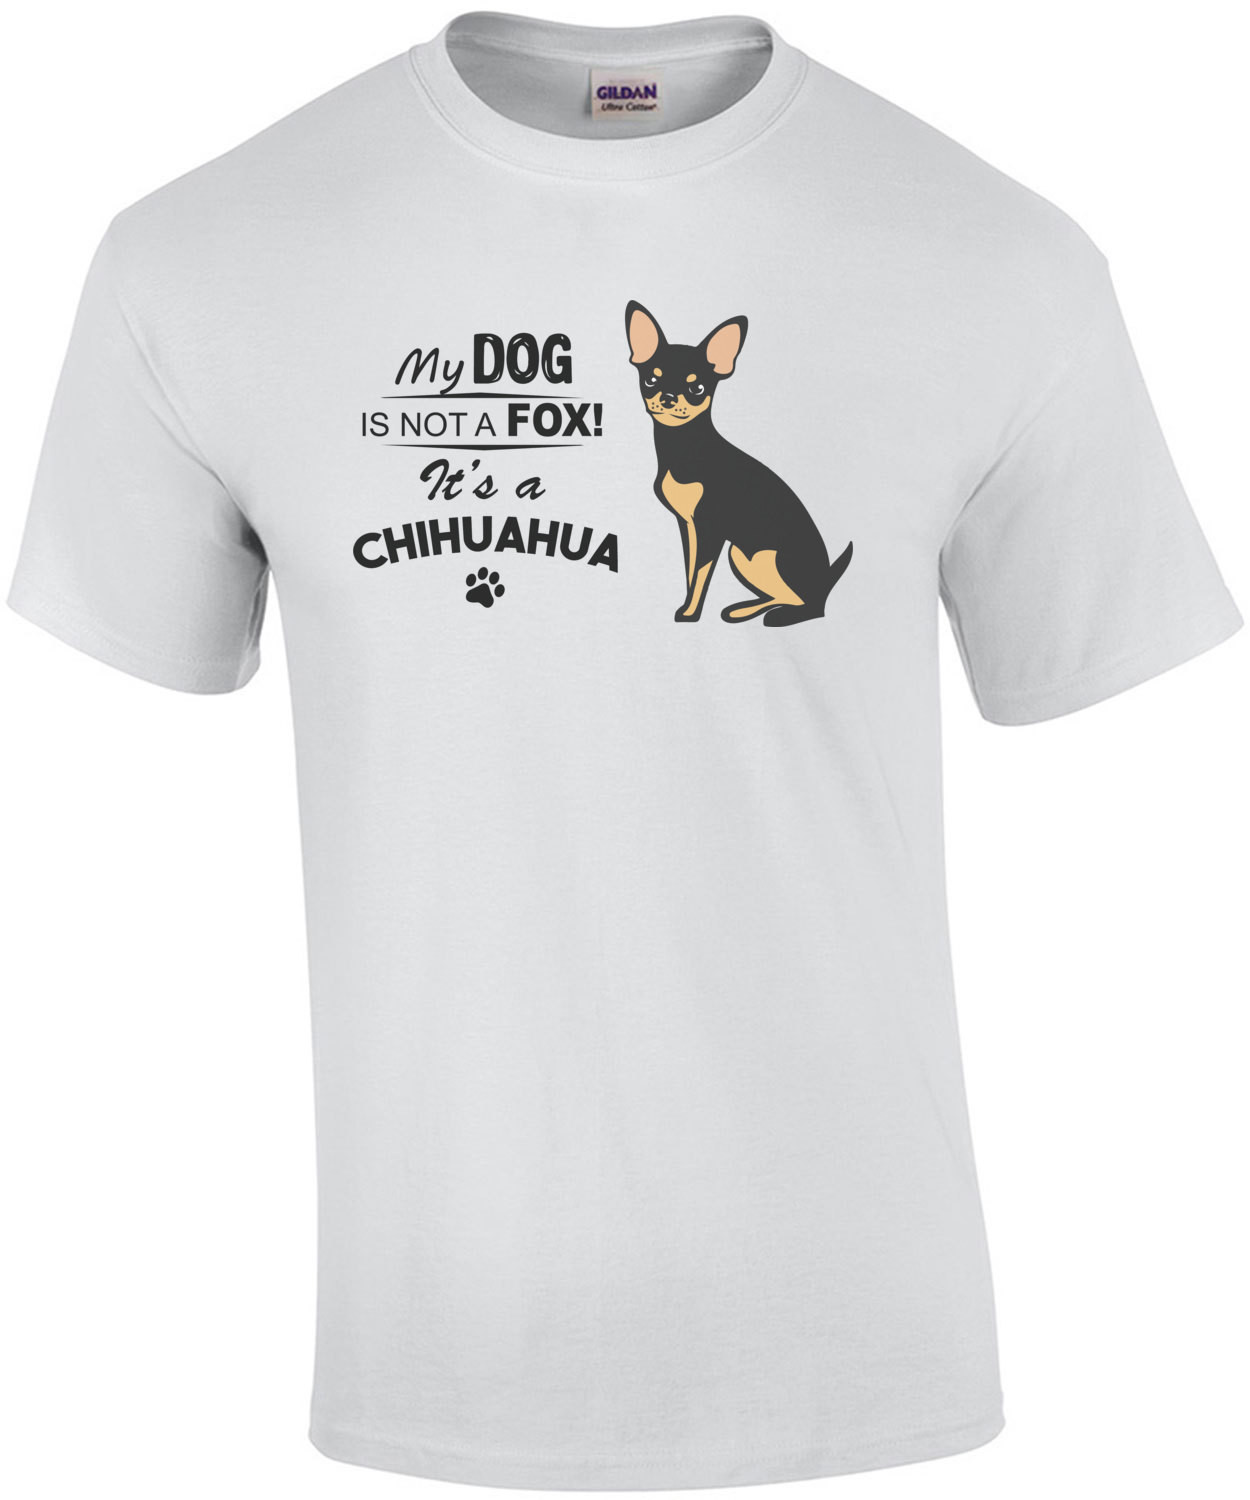 My dog is not a fox! It's a chihuahua - chihuahua t-shirt